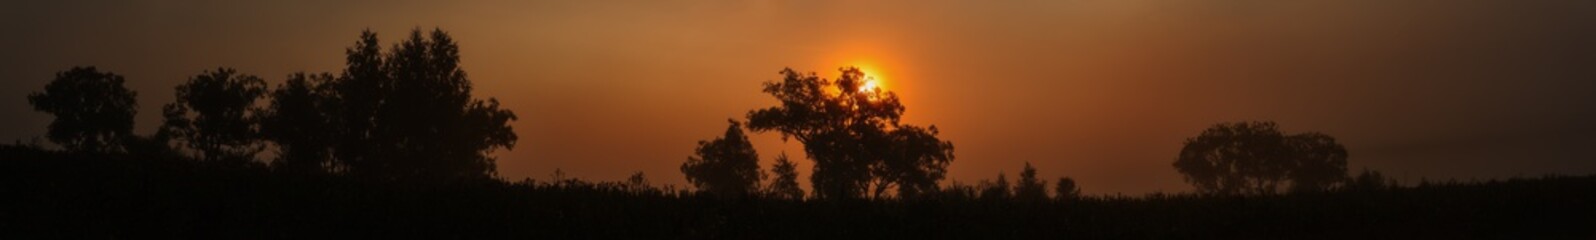 panorama of the misty sunrise silhouette - trees against the background of the rising sun in the early foggy morning